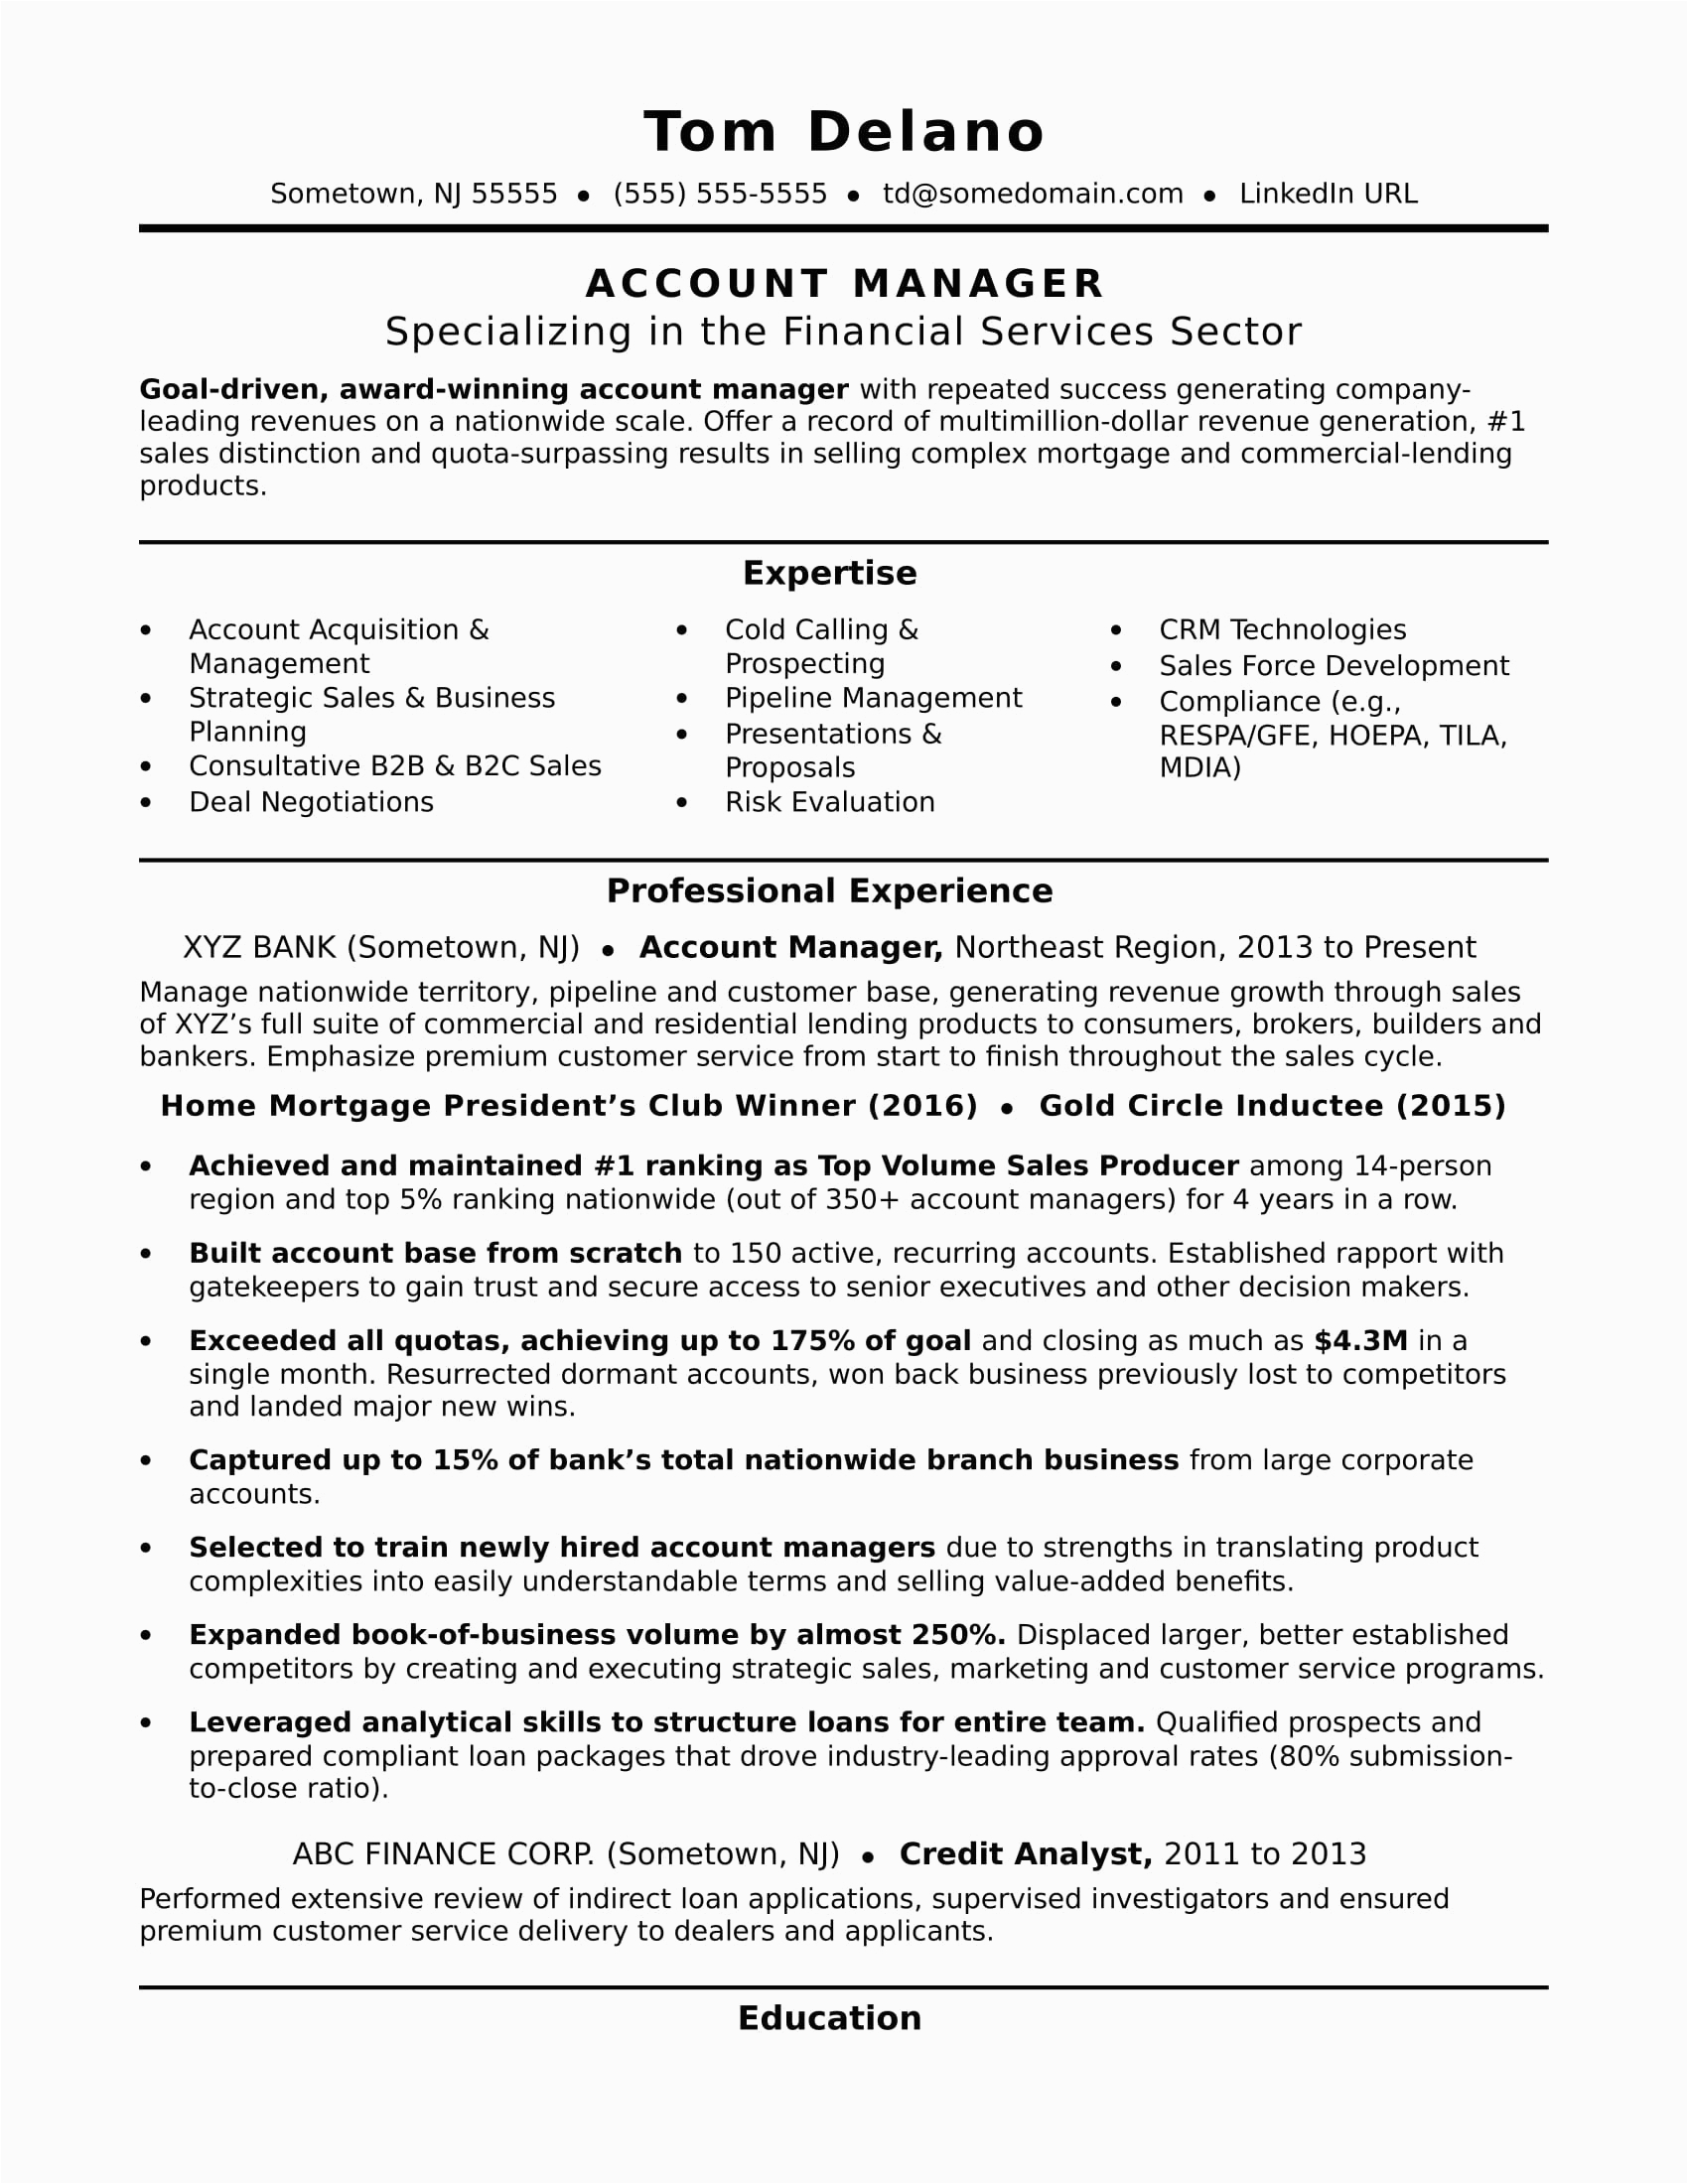 Sample Professional Resume It Manager Position Account Manager Resume